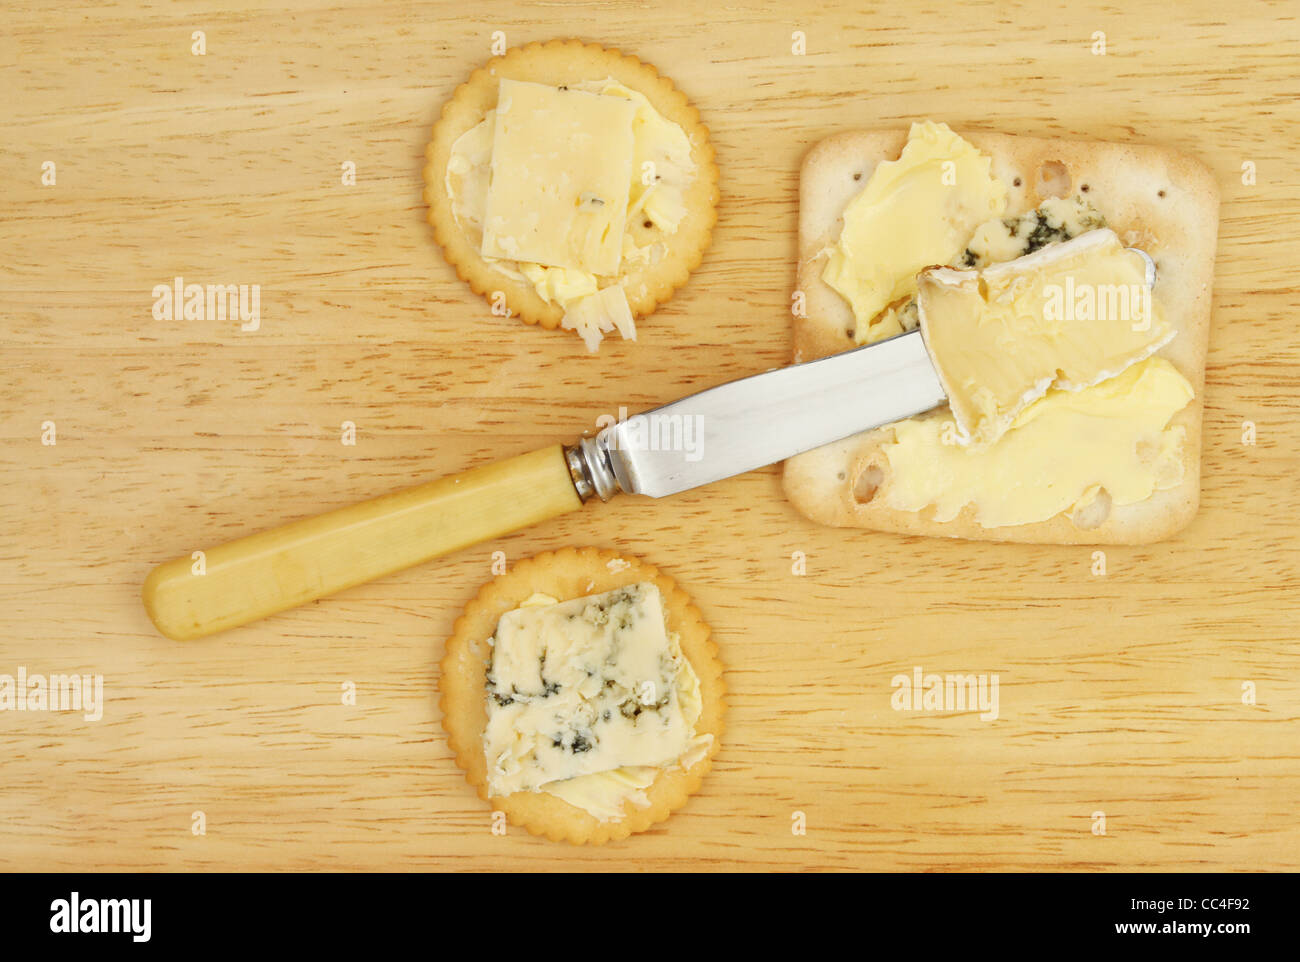 Biscuits cheese and butter knife on a wooden board Stock Photo